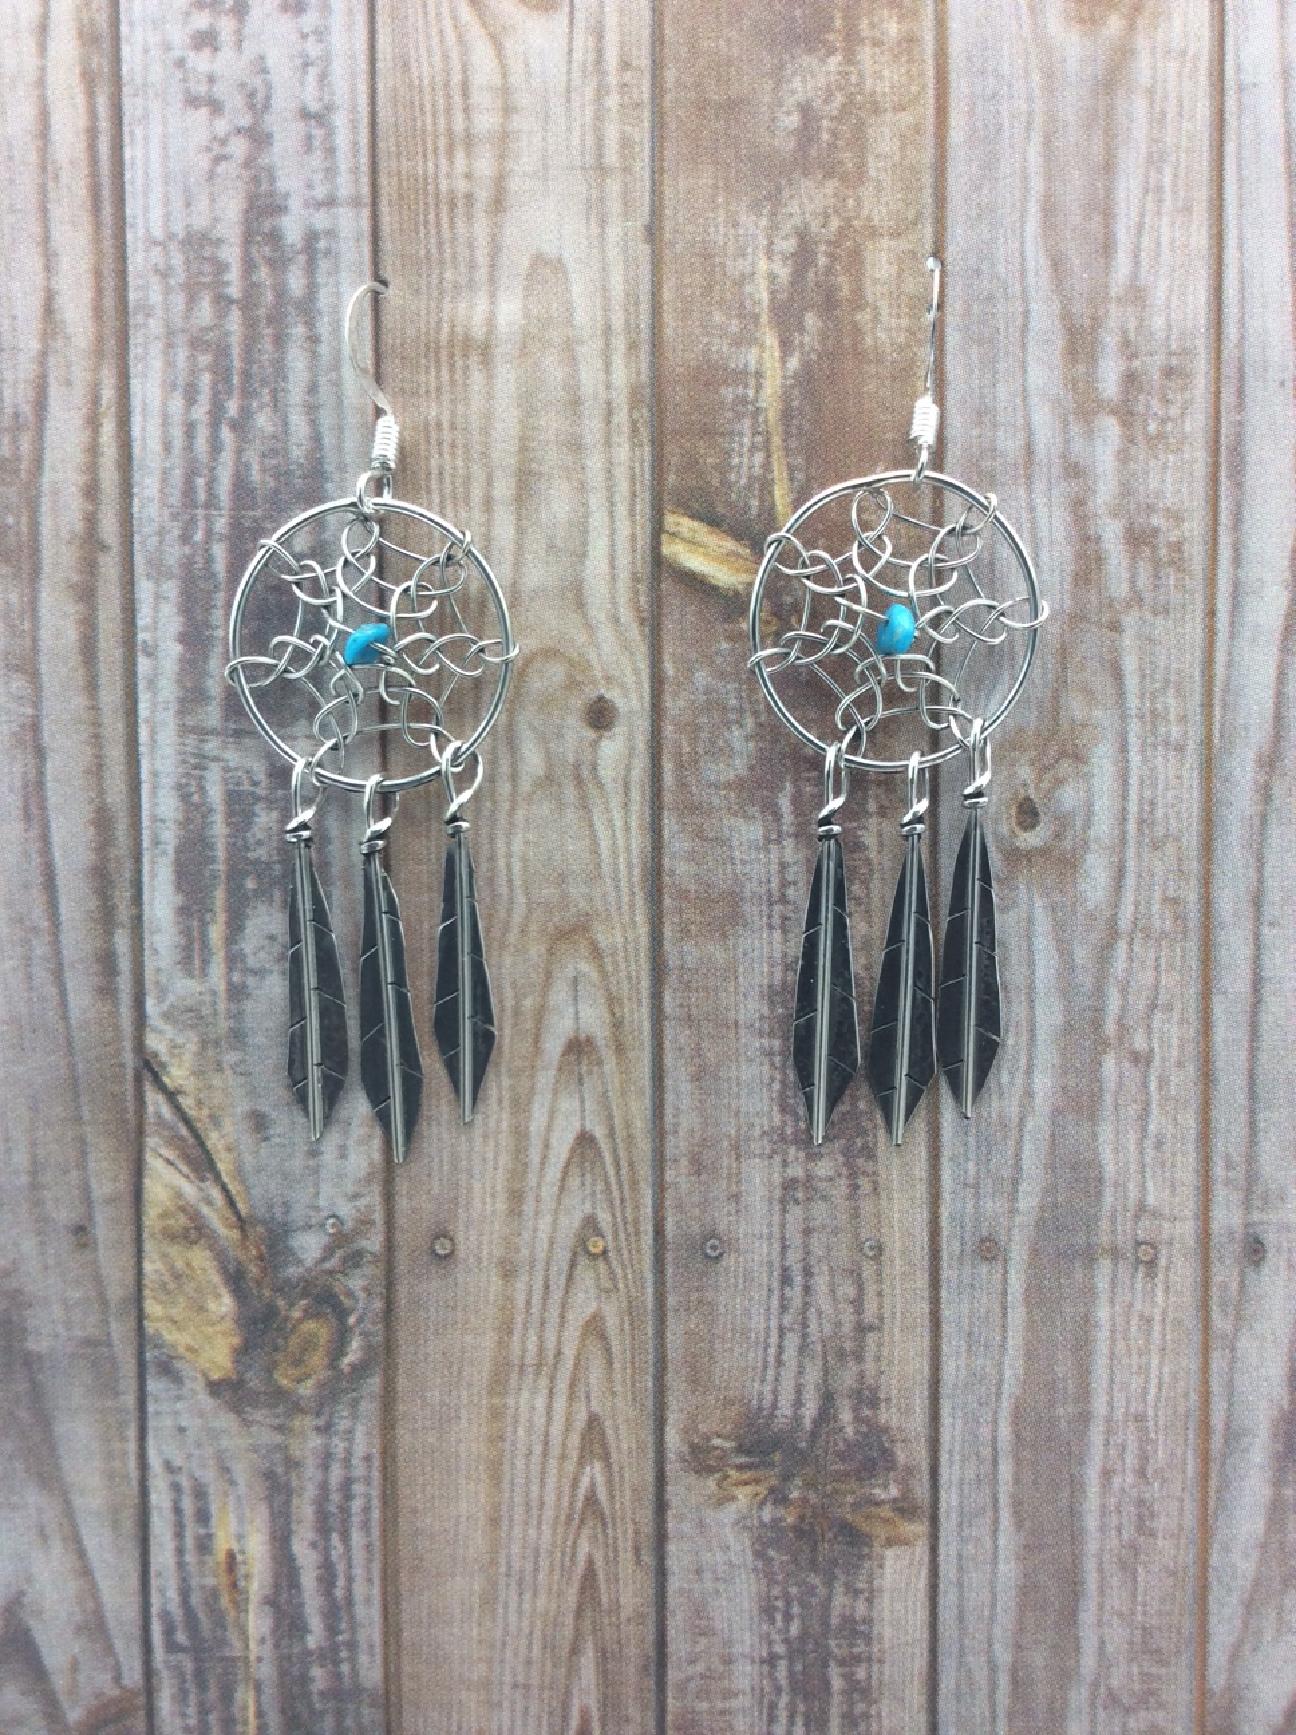 Dreamcatcher Earrings £10.00 - Gothic Clothing by Moonmaiden